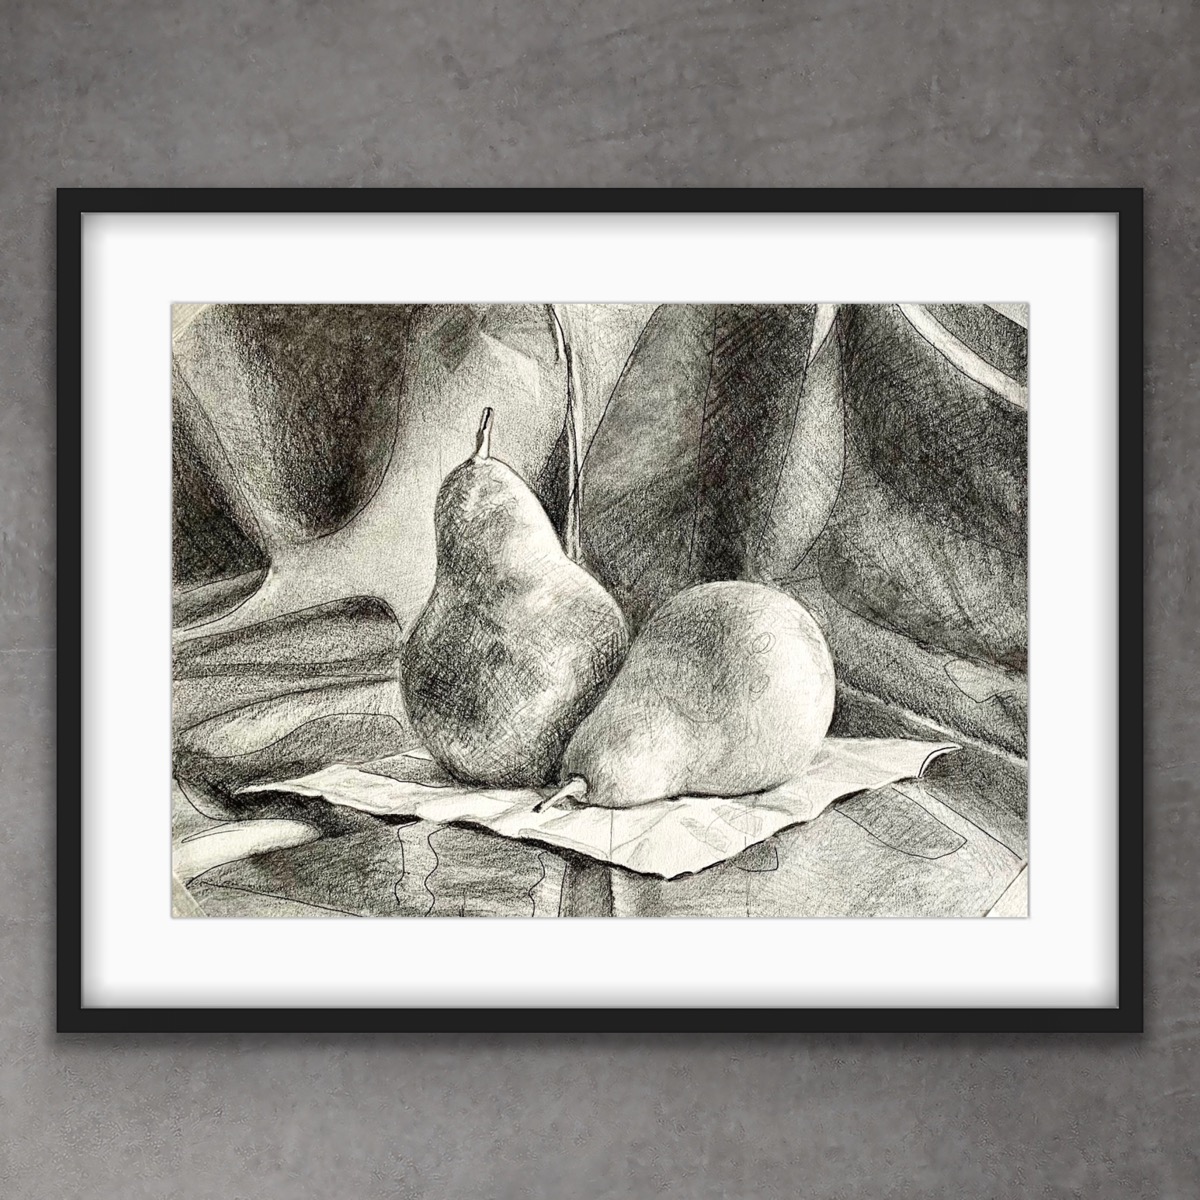 Charcoal drawing by Karen White